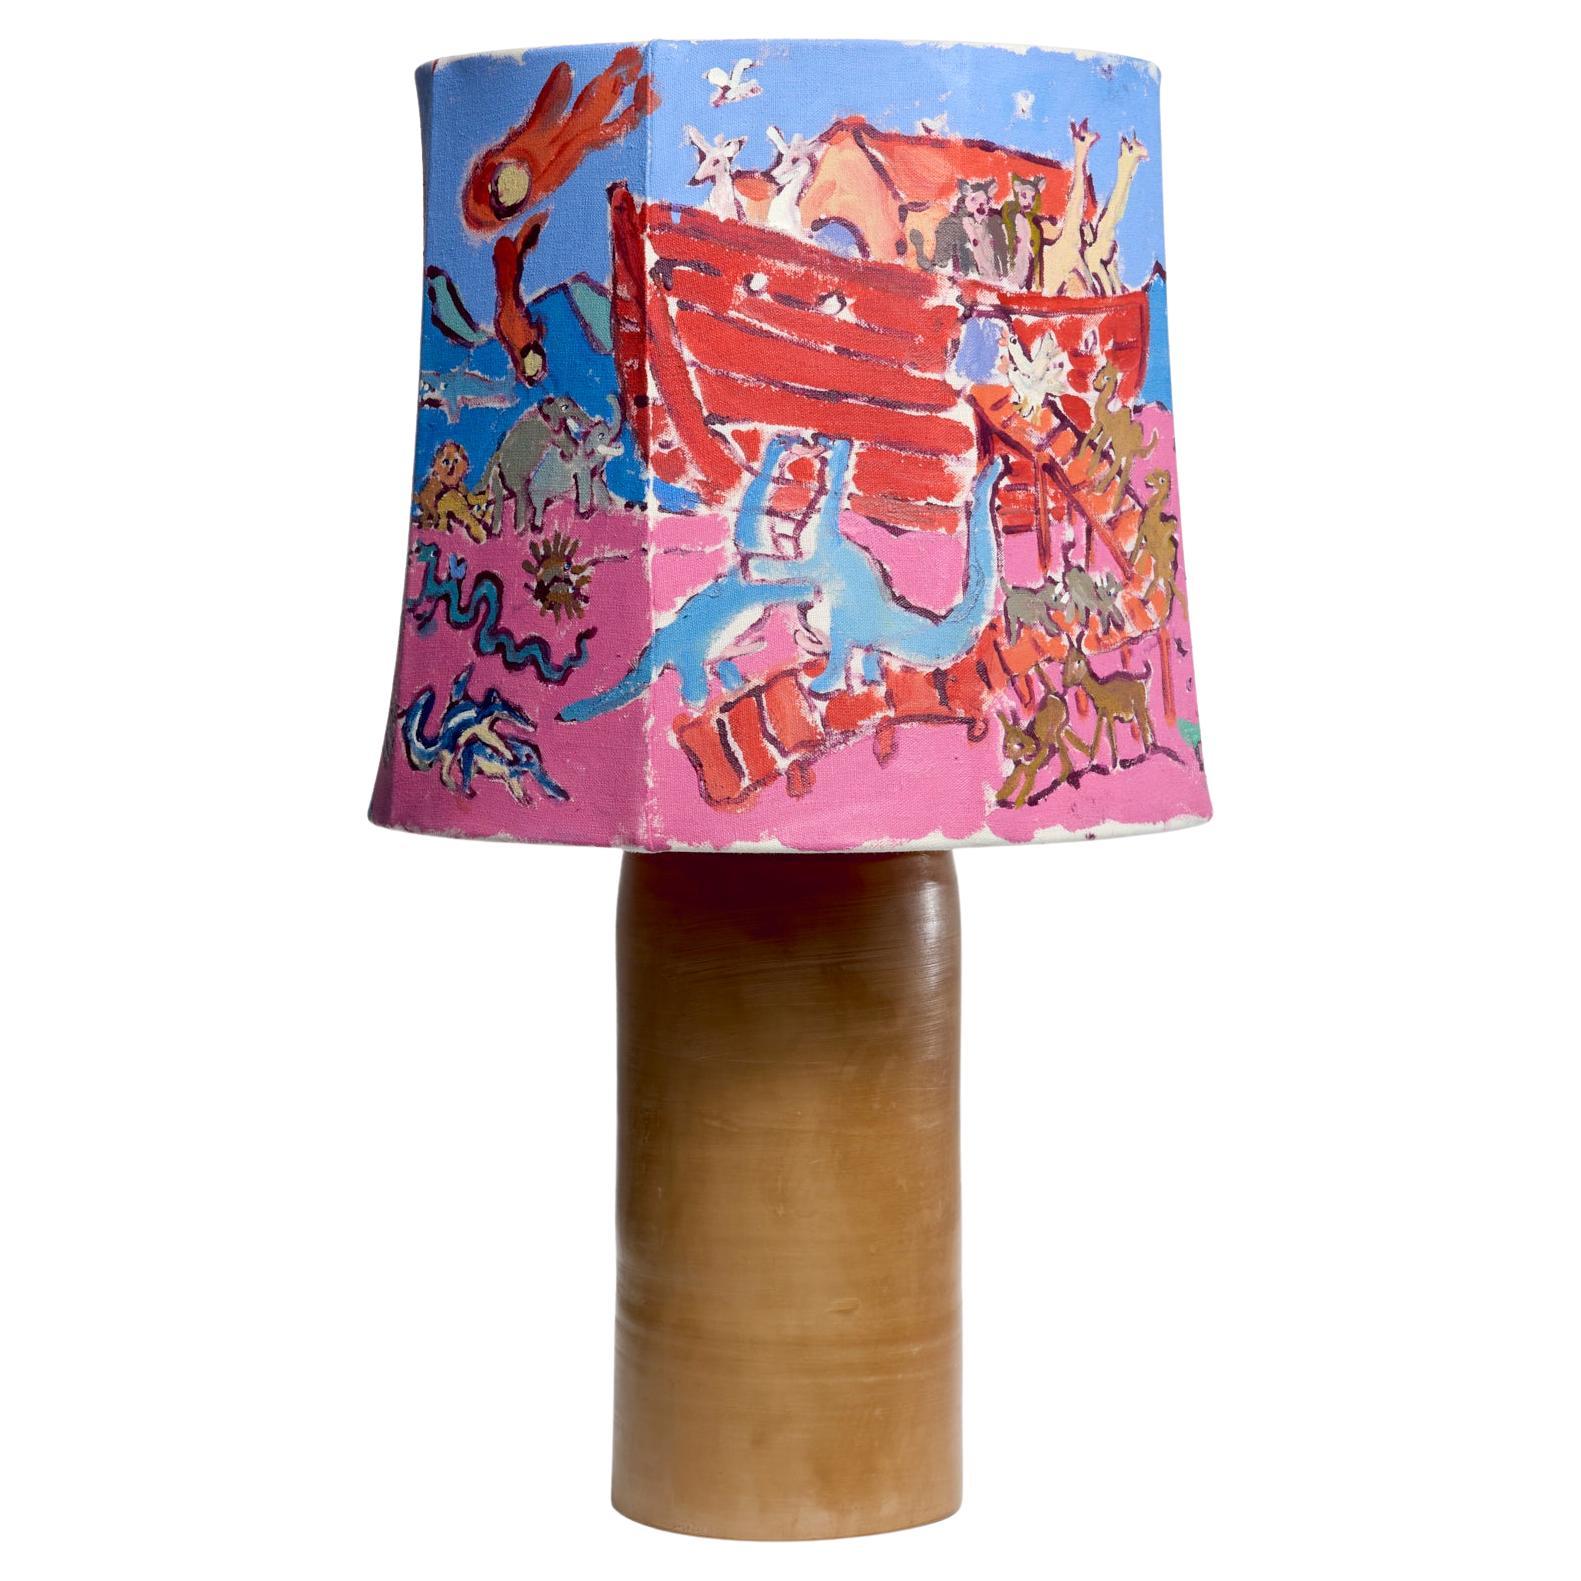 Flaminia Veronesi Hand Painted Table Lamp in Collaboration with Nassi